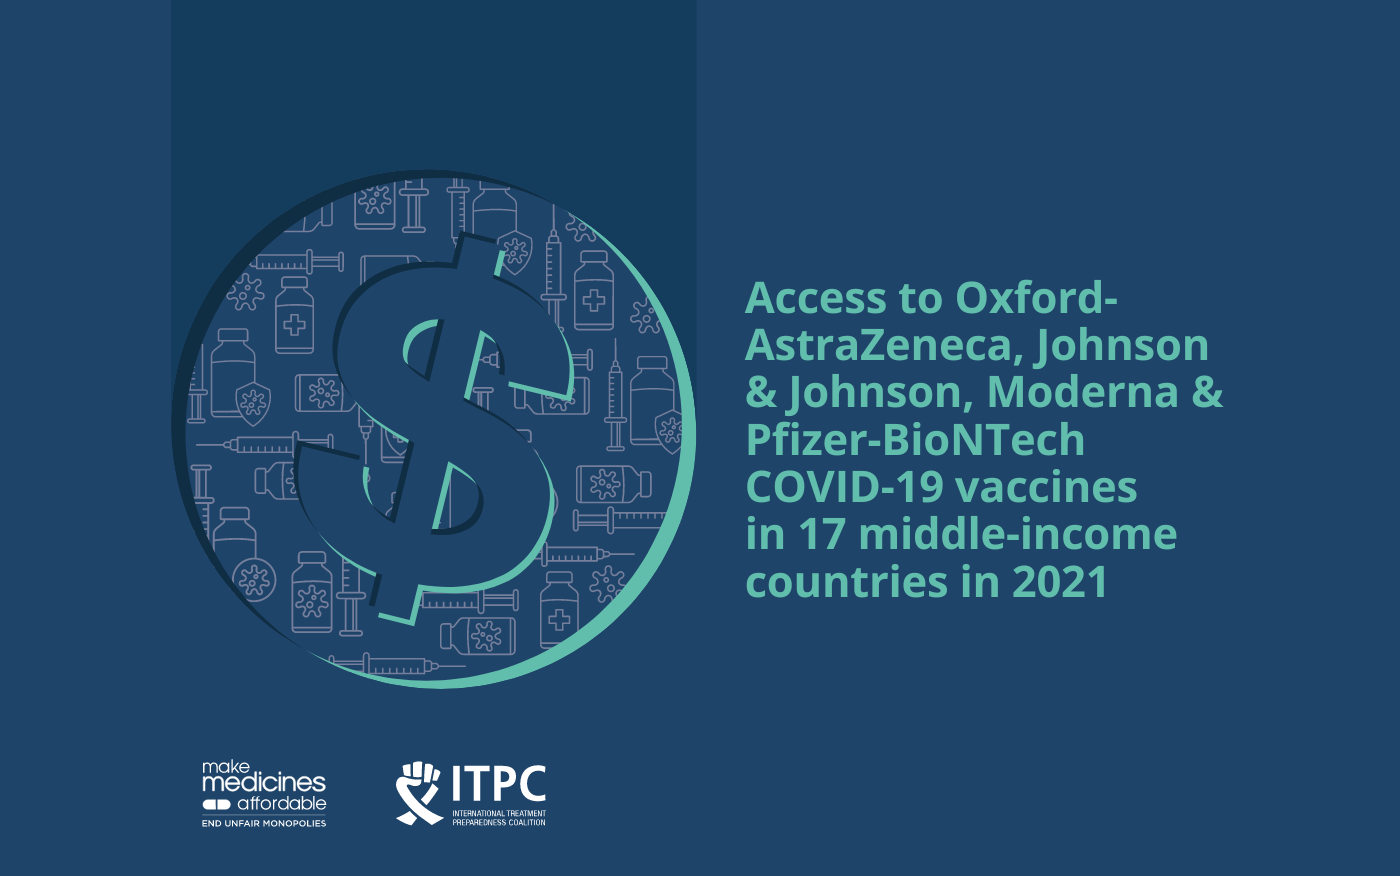 Access to COVID-19 Vaccines From Oxford/AstraZeneca, Johnson and Johnson, Moderna and Pfizer/BioNTech in 17 Middle-Income Countries